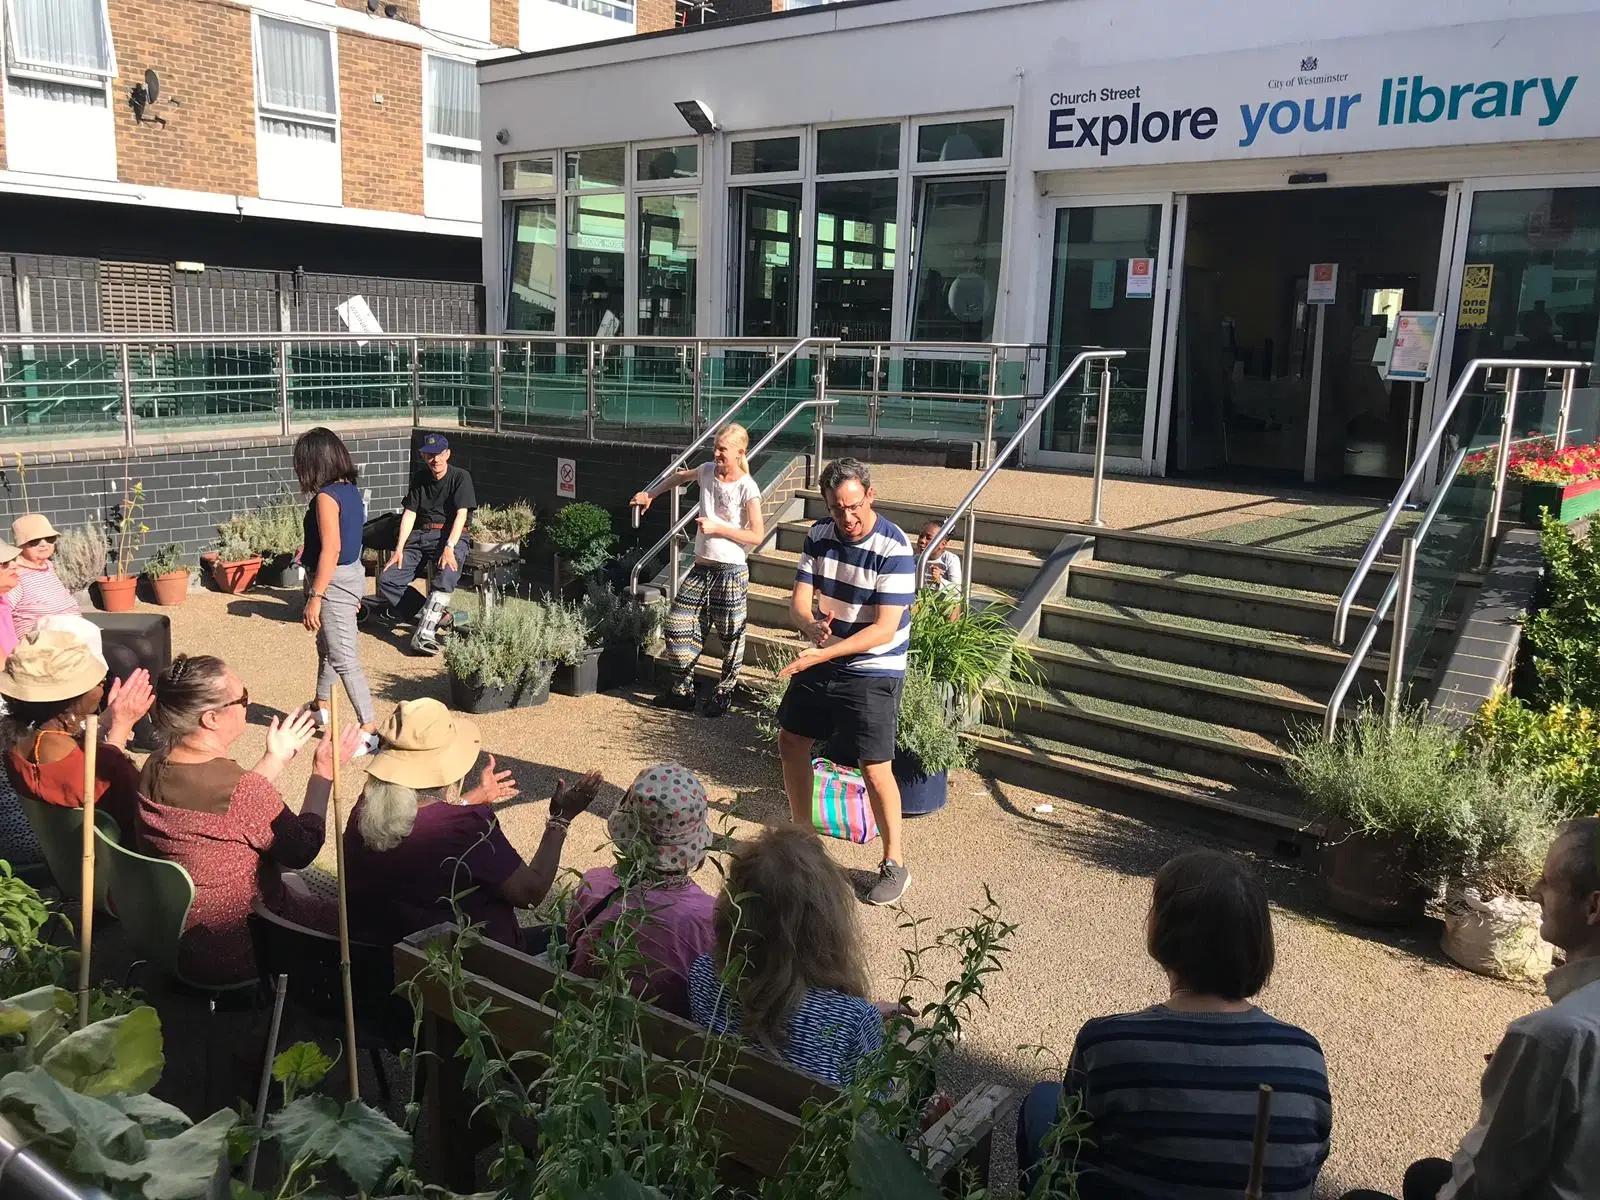 Community members enjoying a sunny day in an urban garden outside the local library.